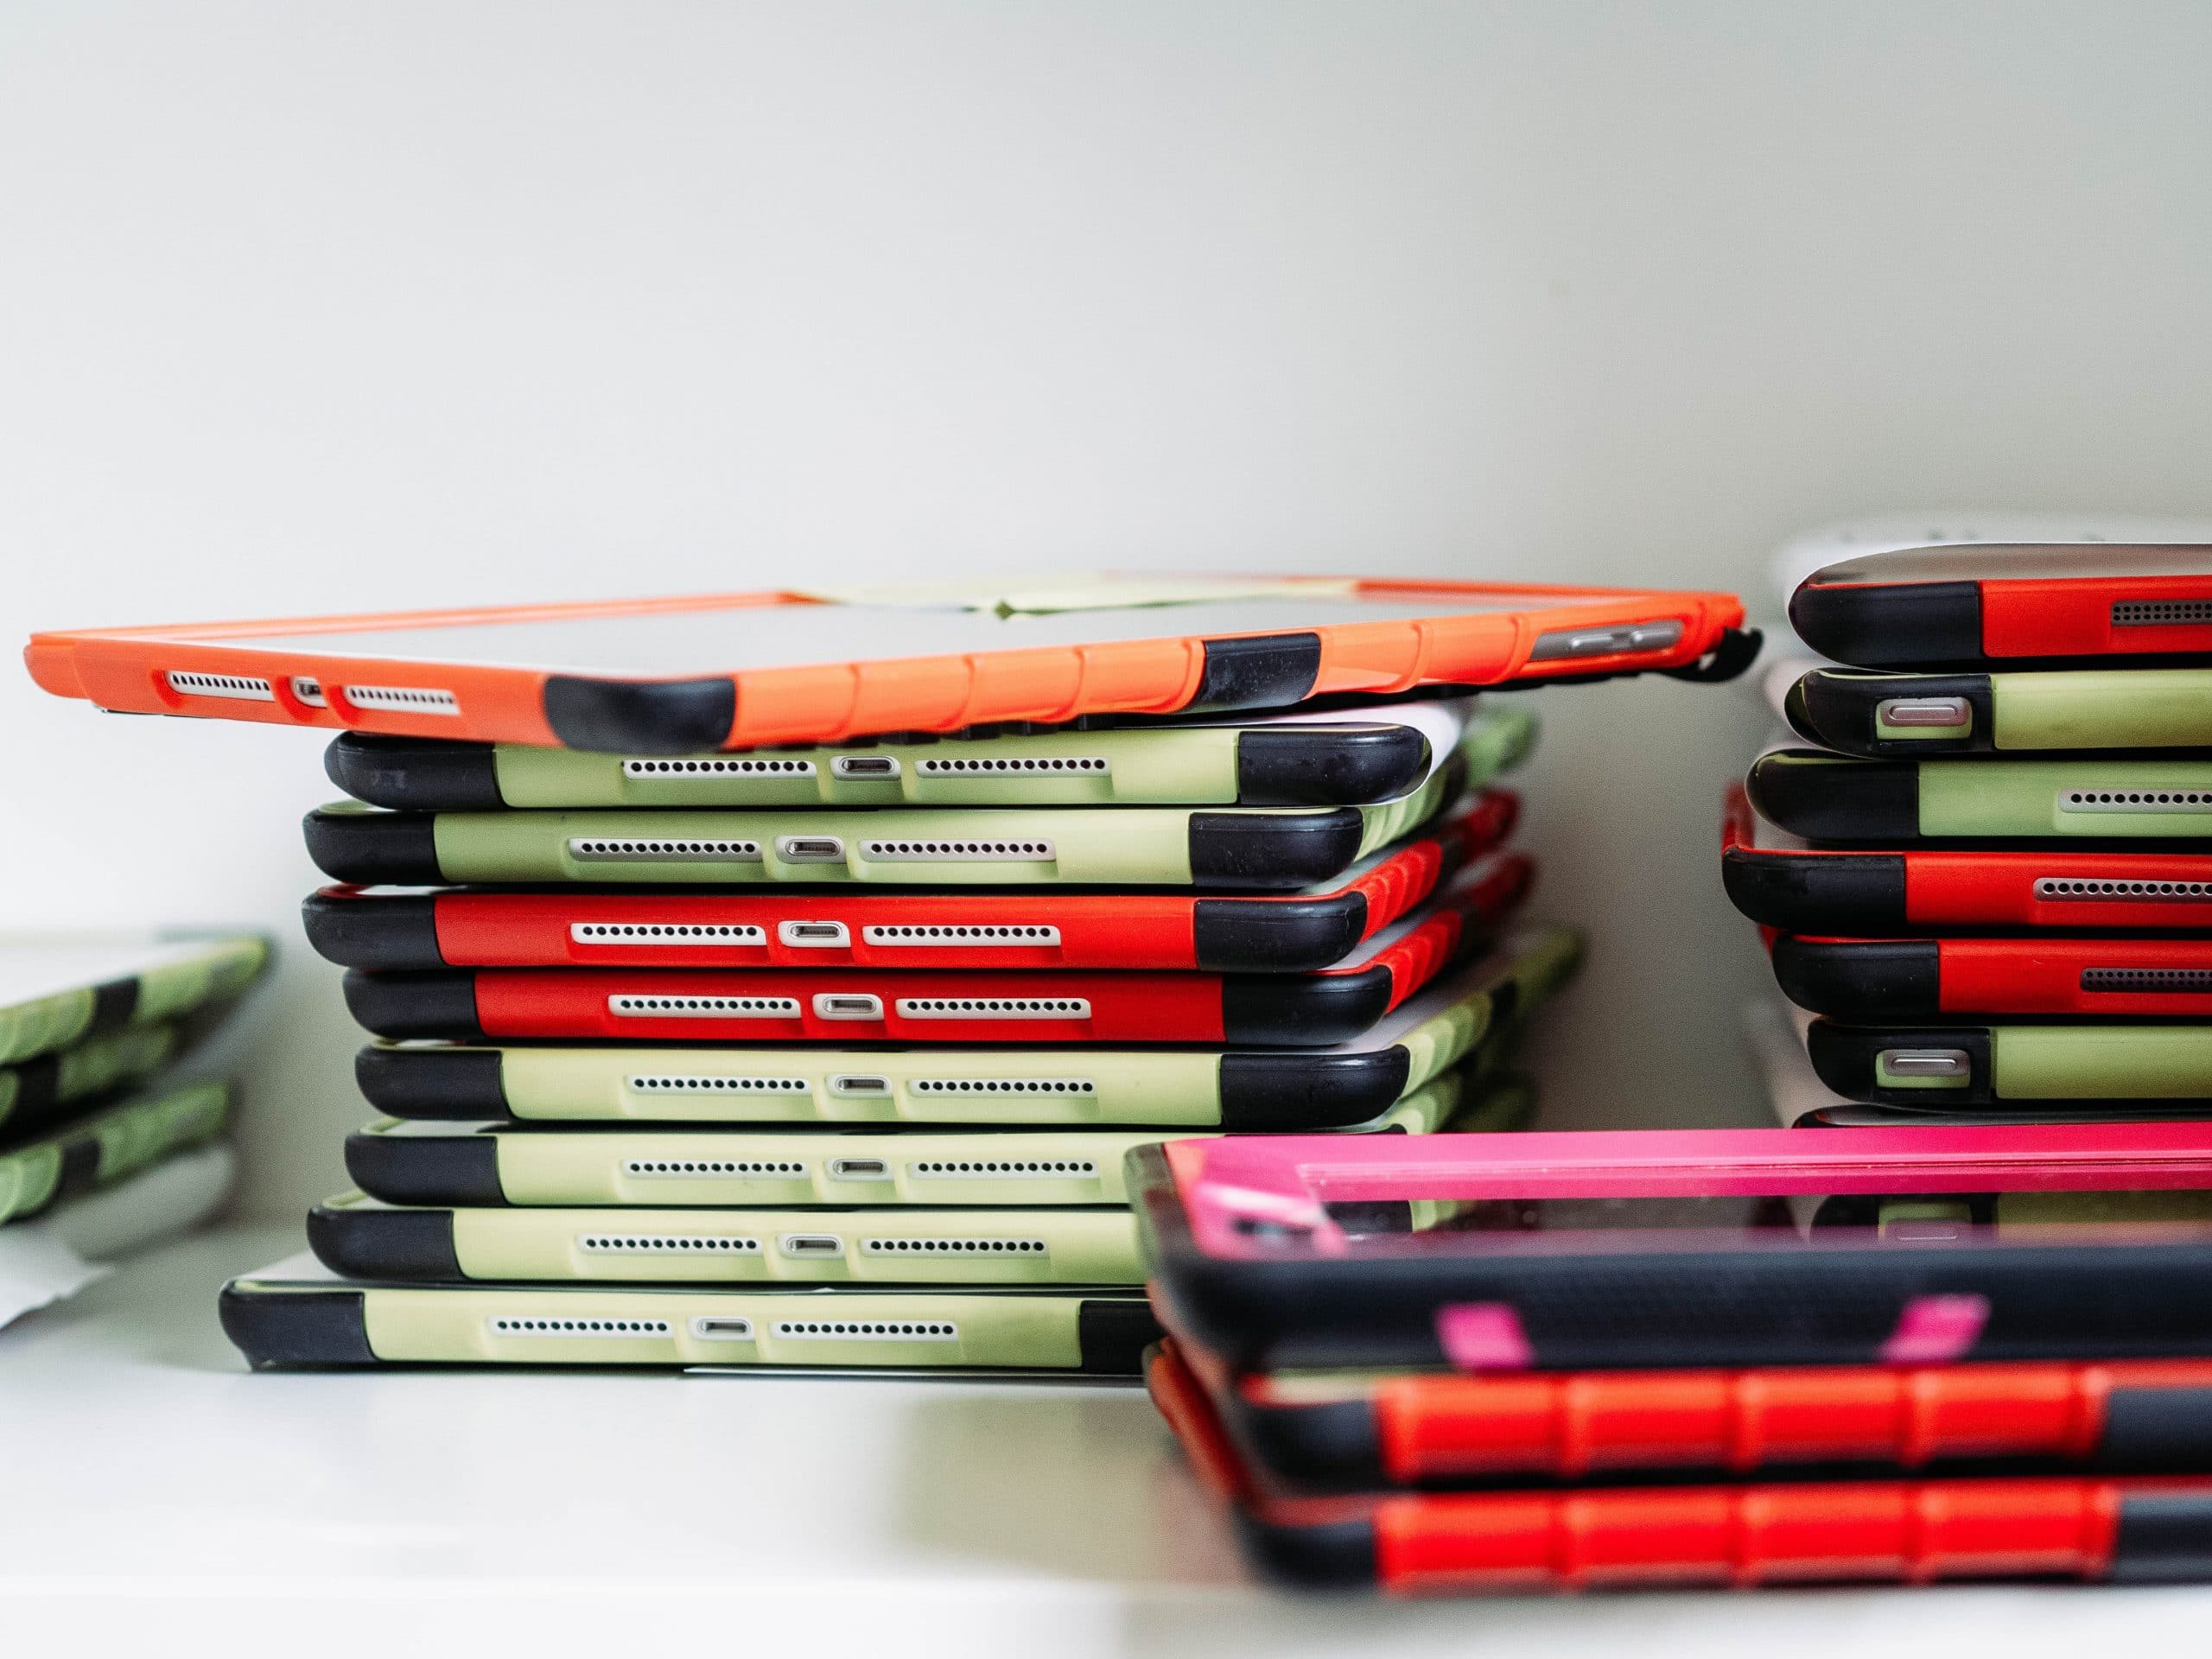 iPads in Schools: A Blessing or a Curse Image